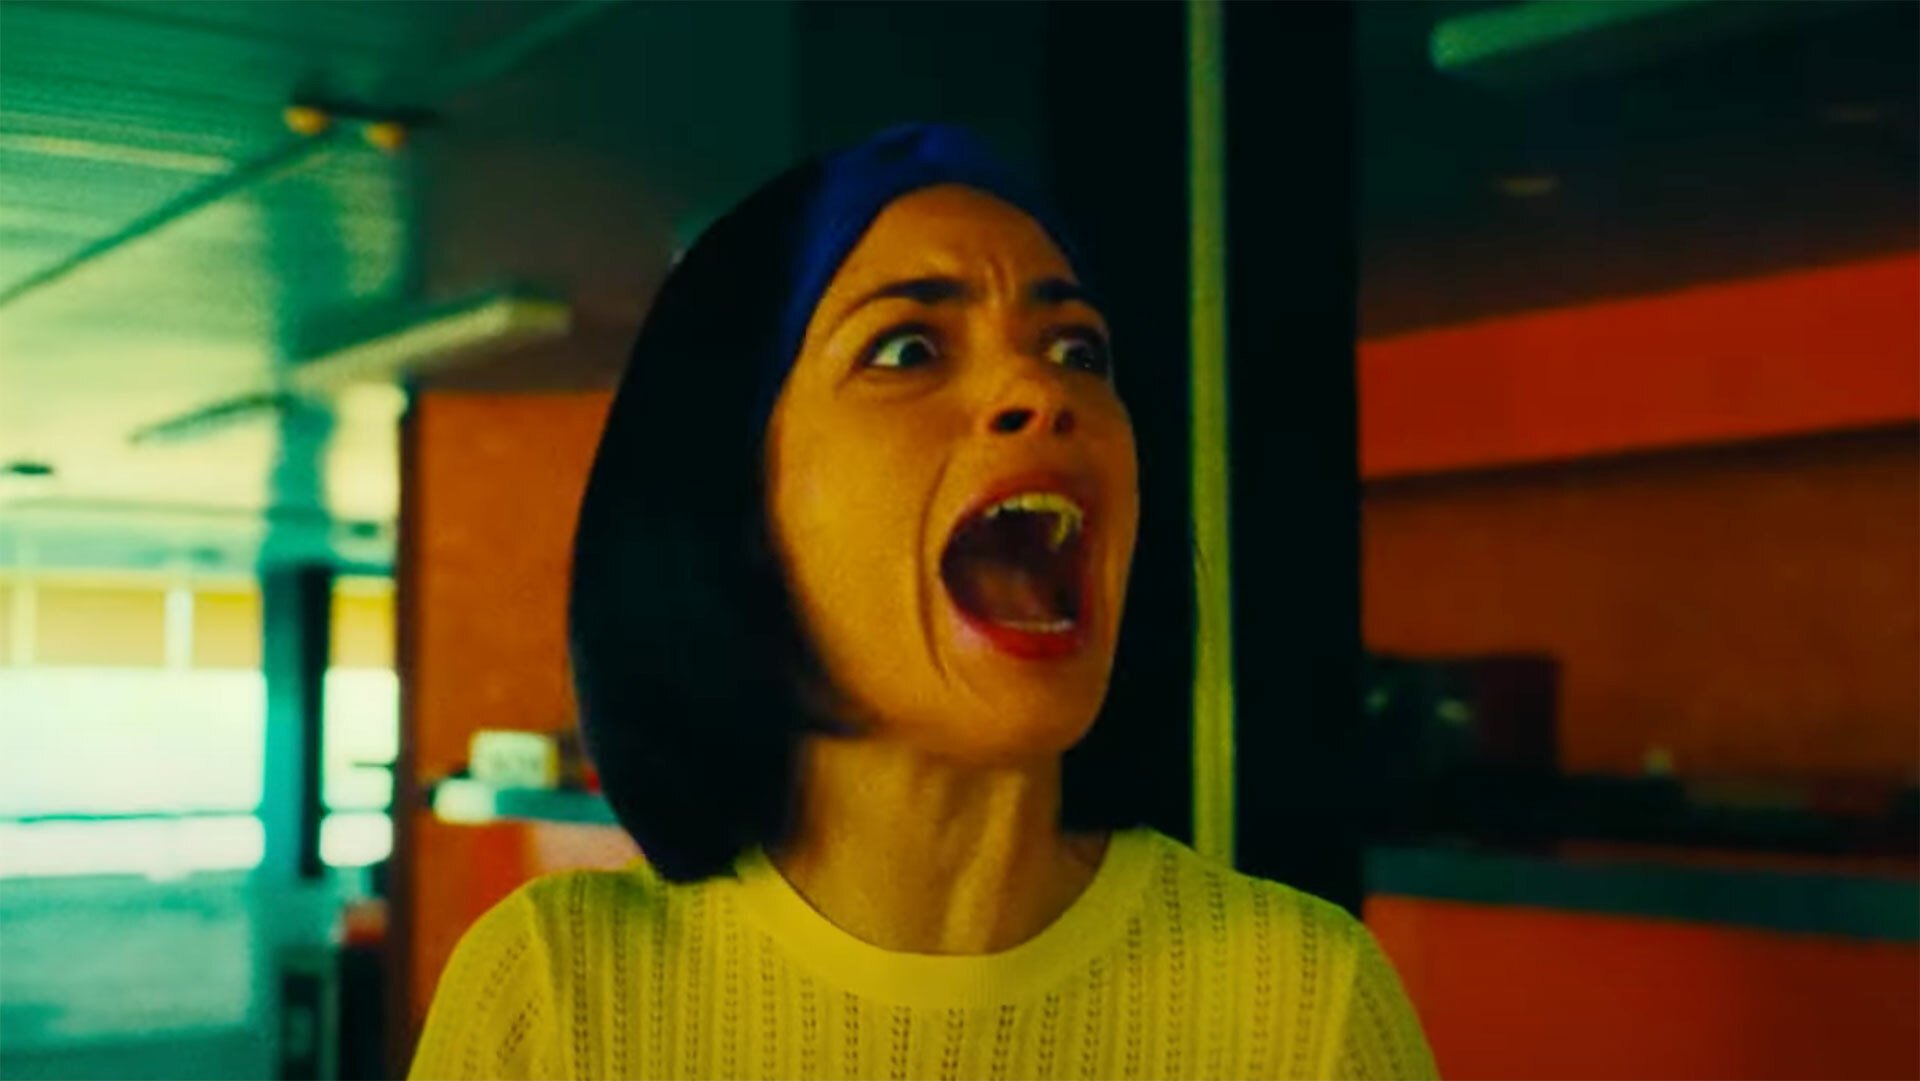 A close-up of a woman screaming.